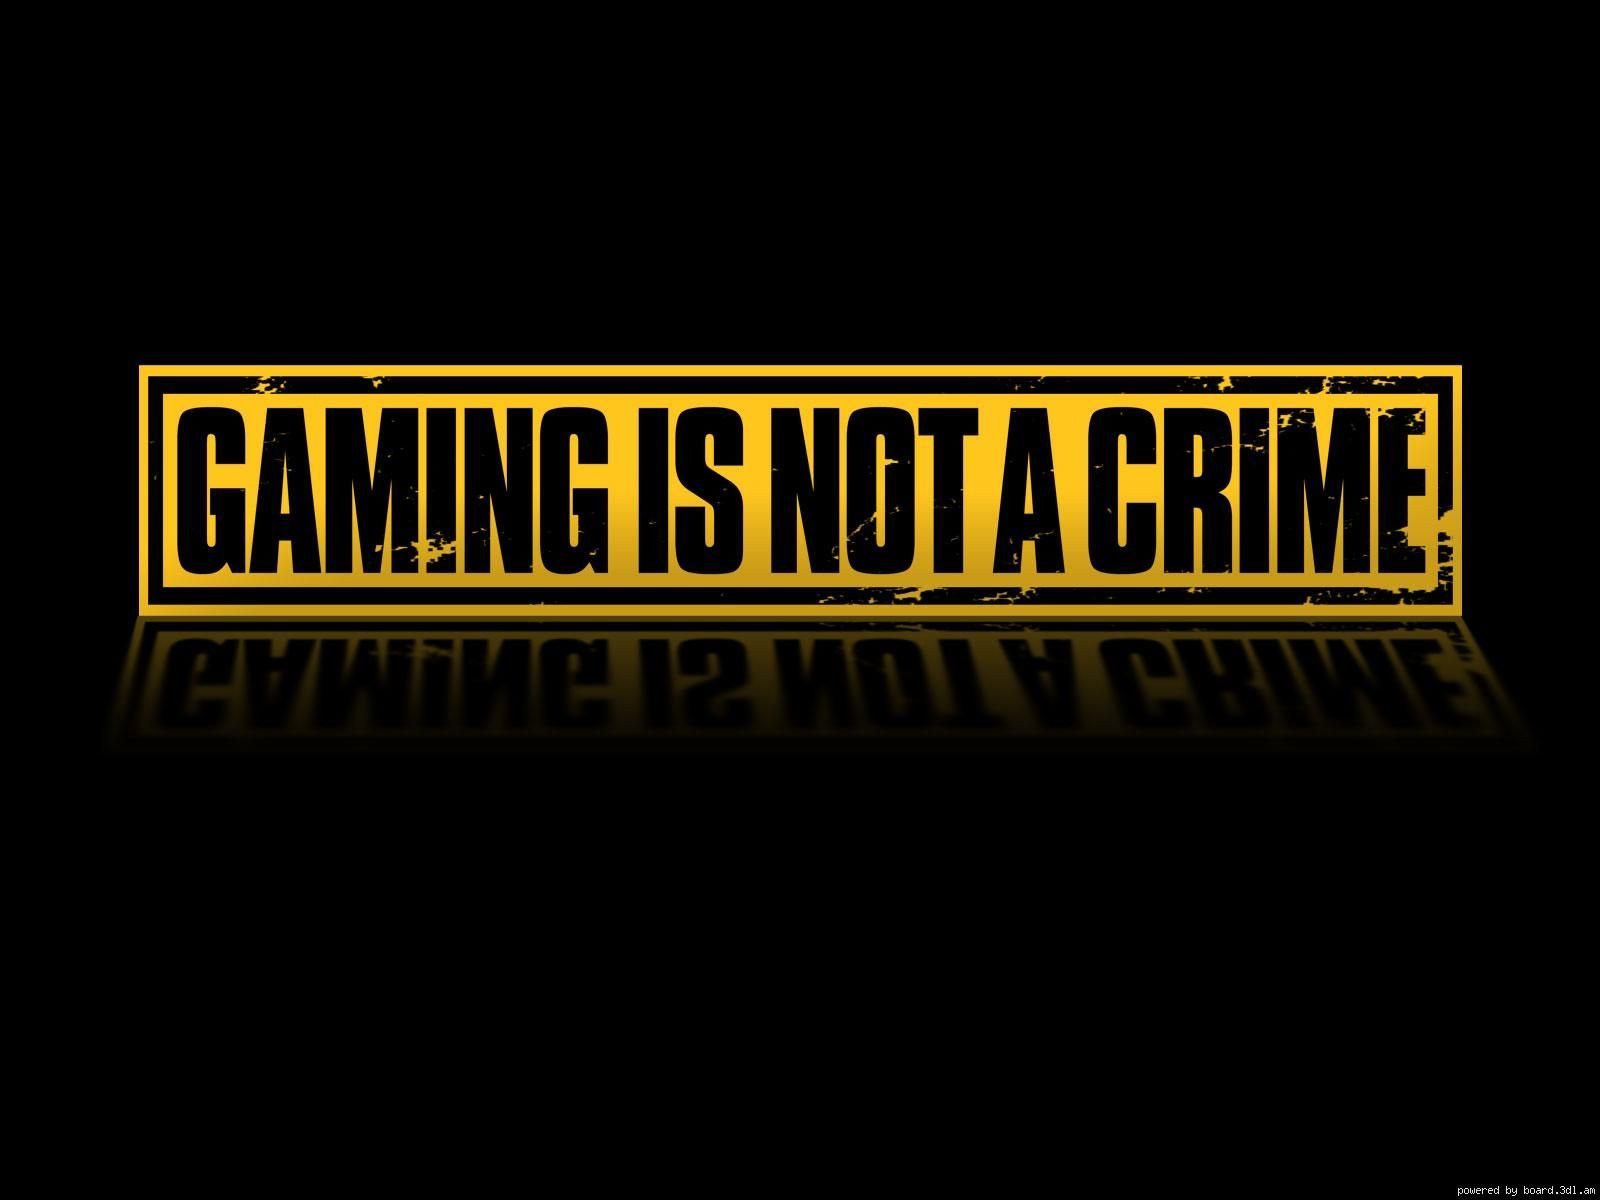 I Am A Gamer Wallpapers